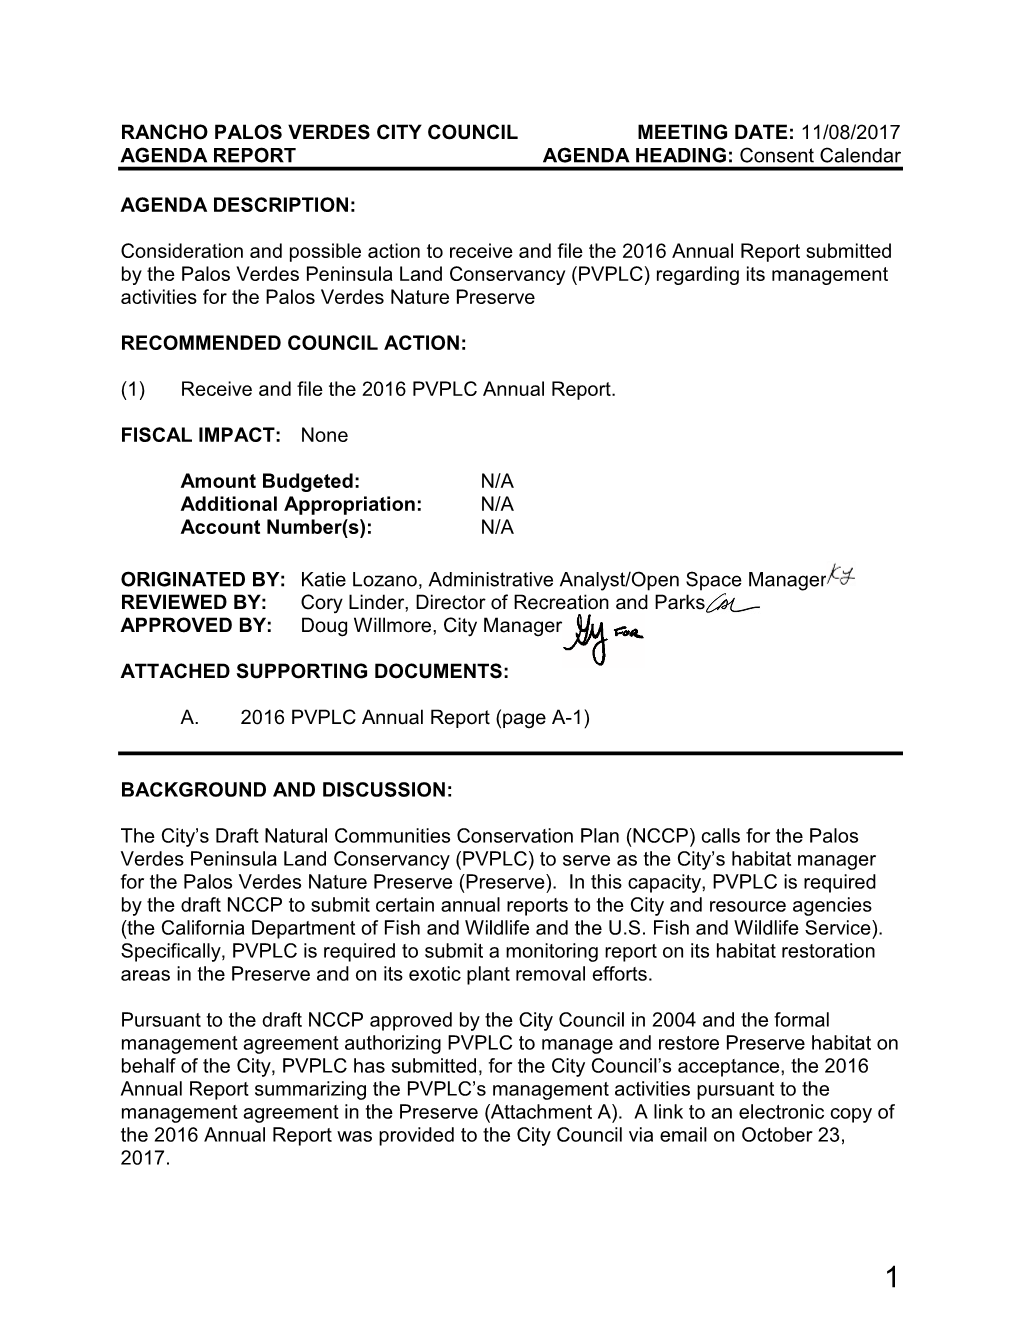 2016 Annual Report Submitted by the Palos Verdes Peninsula Land Conservancy (PVPLC) Regarding Its Management Activities for the Palos Verdes Nature Preserve